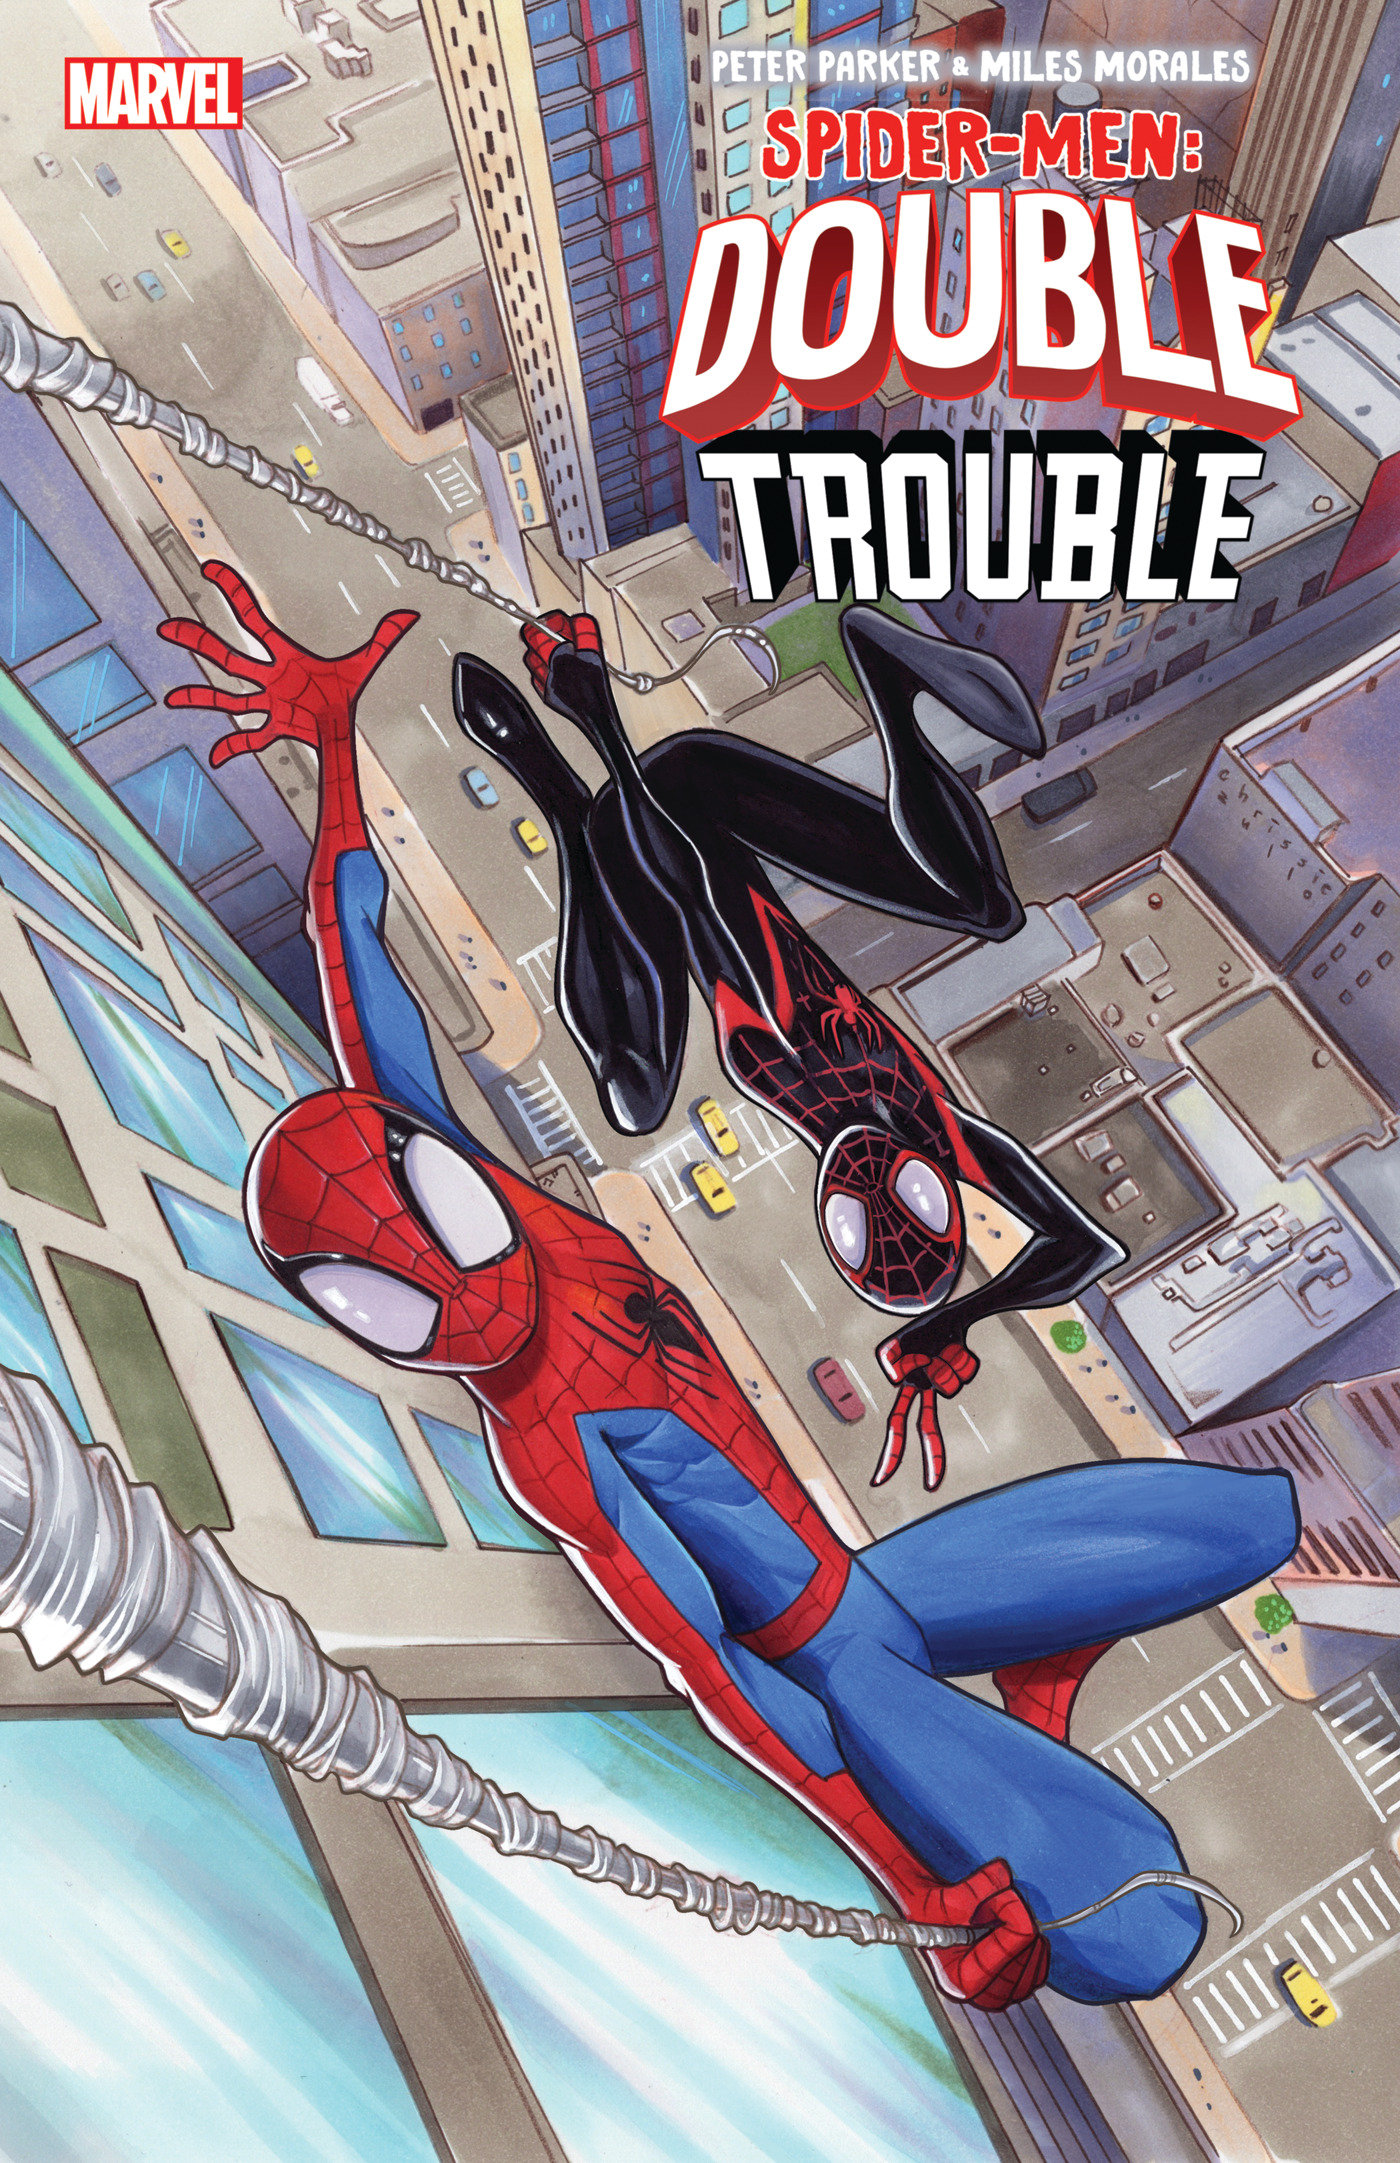 Peter Parker & Miles Morales Spider-Men Double Trouble #1 1 for 25 Incentive Zullo Variant (Of 4)